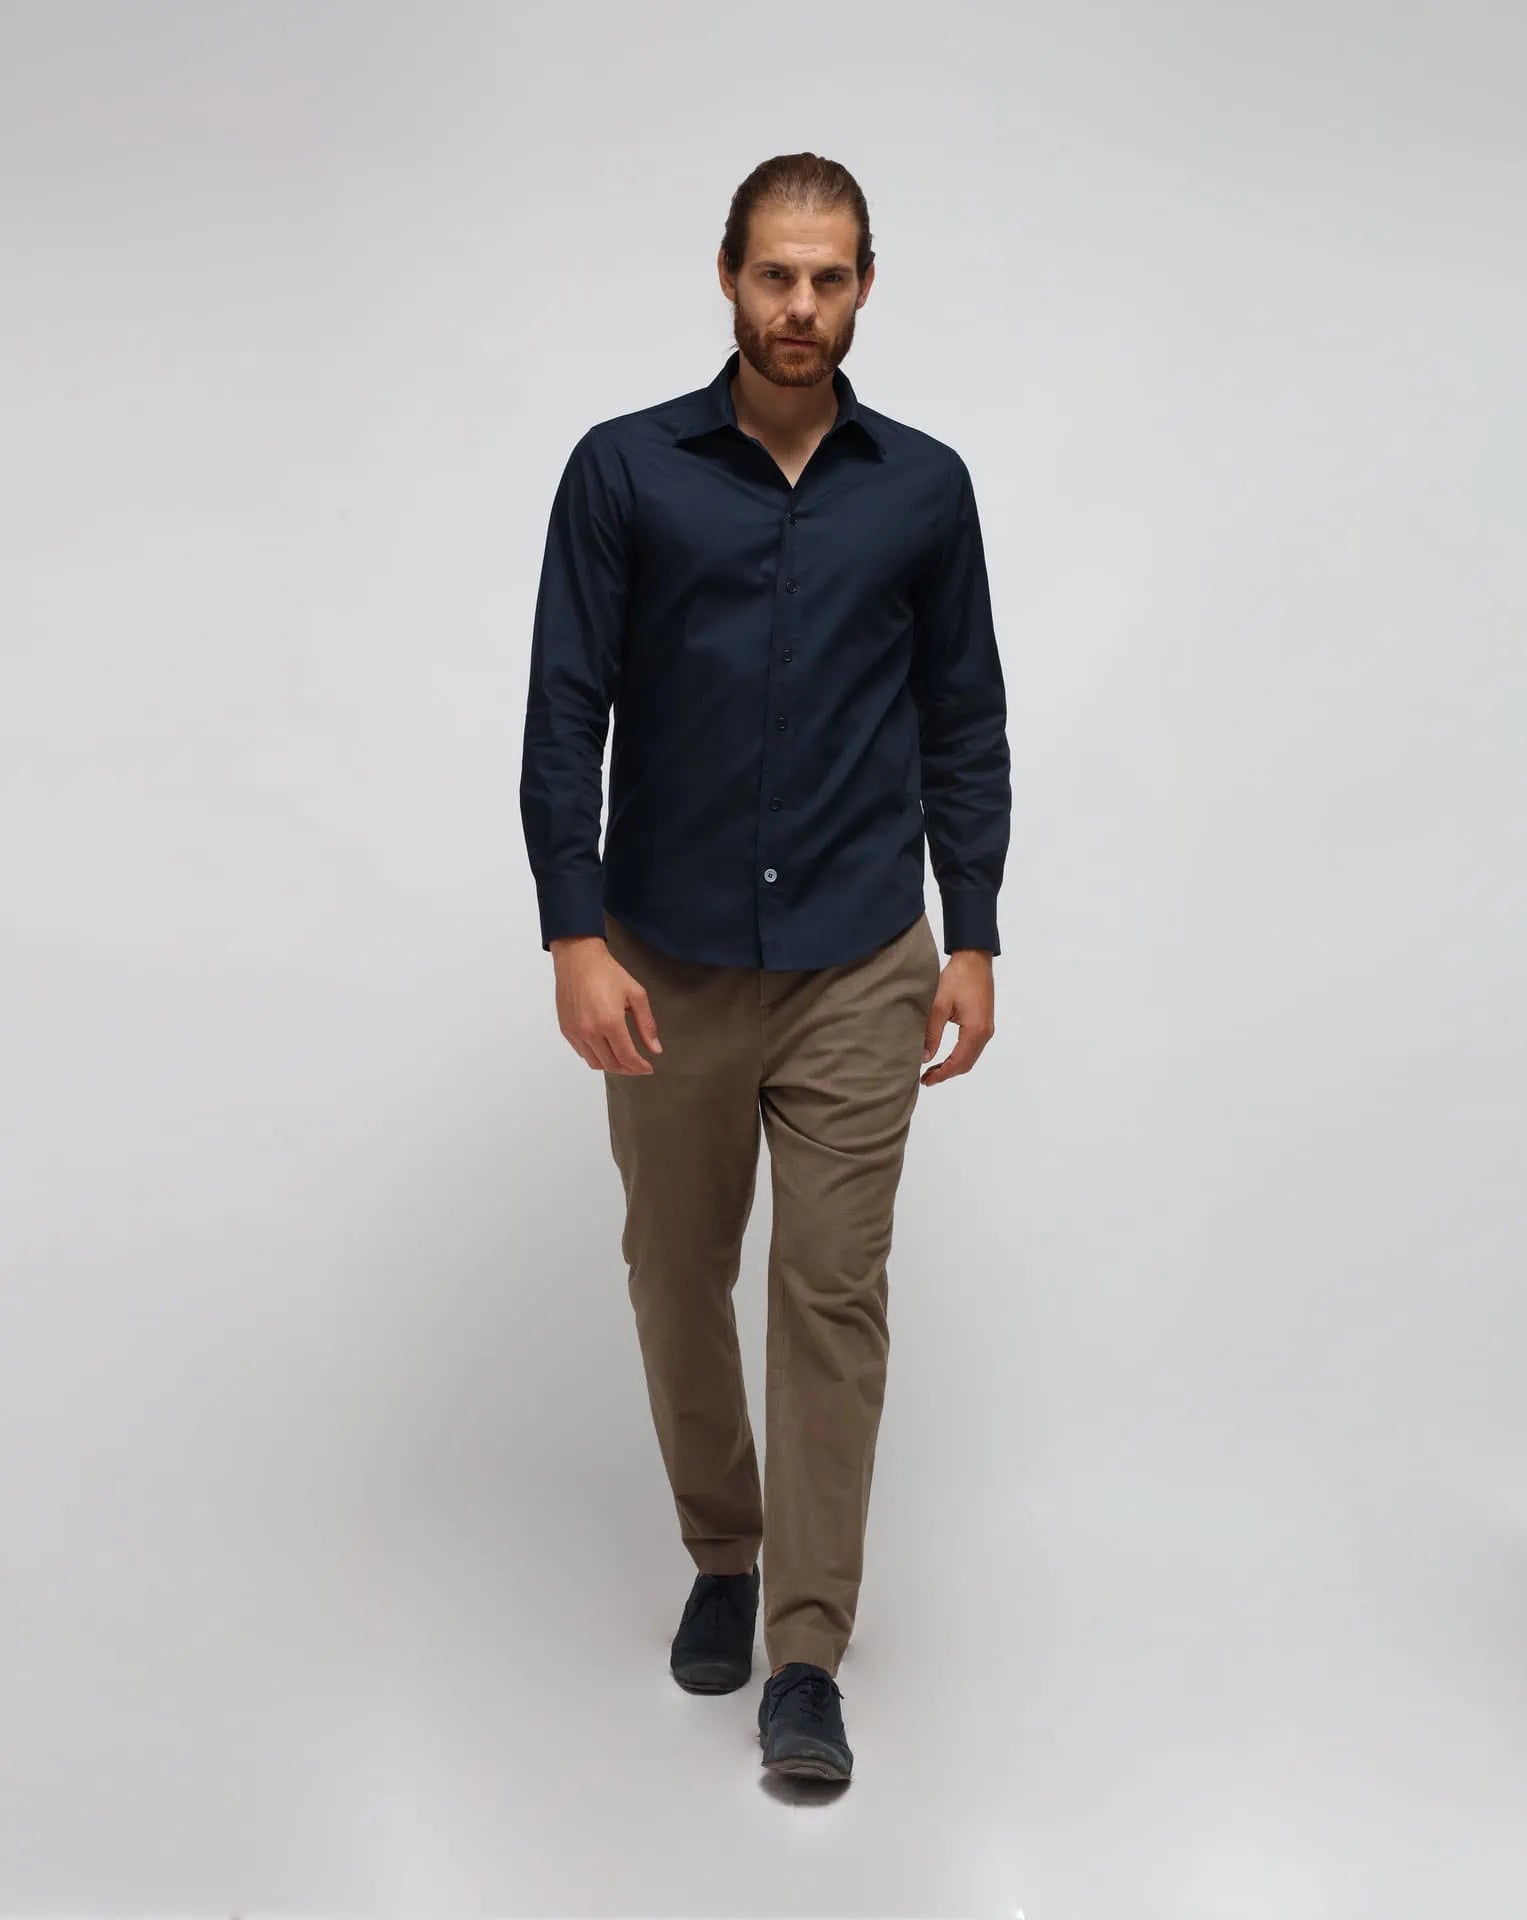 The Men's Shirt in Blue